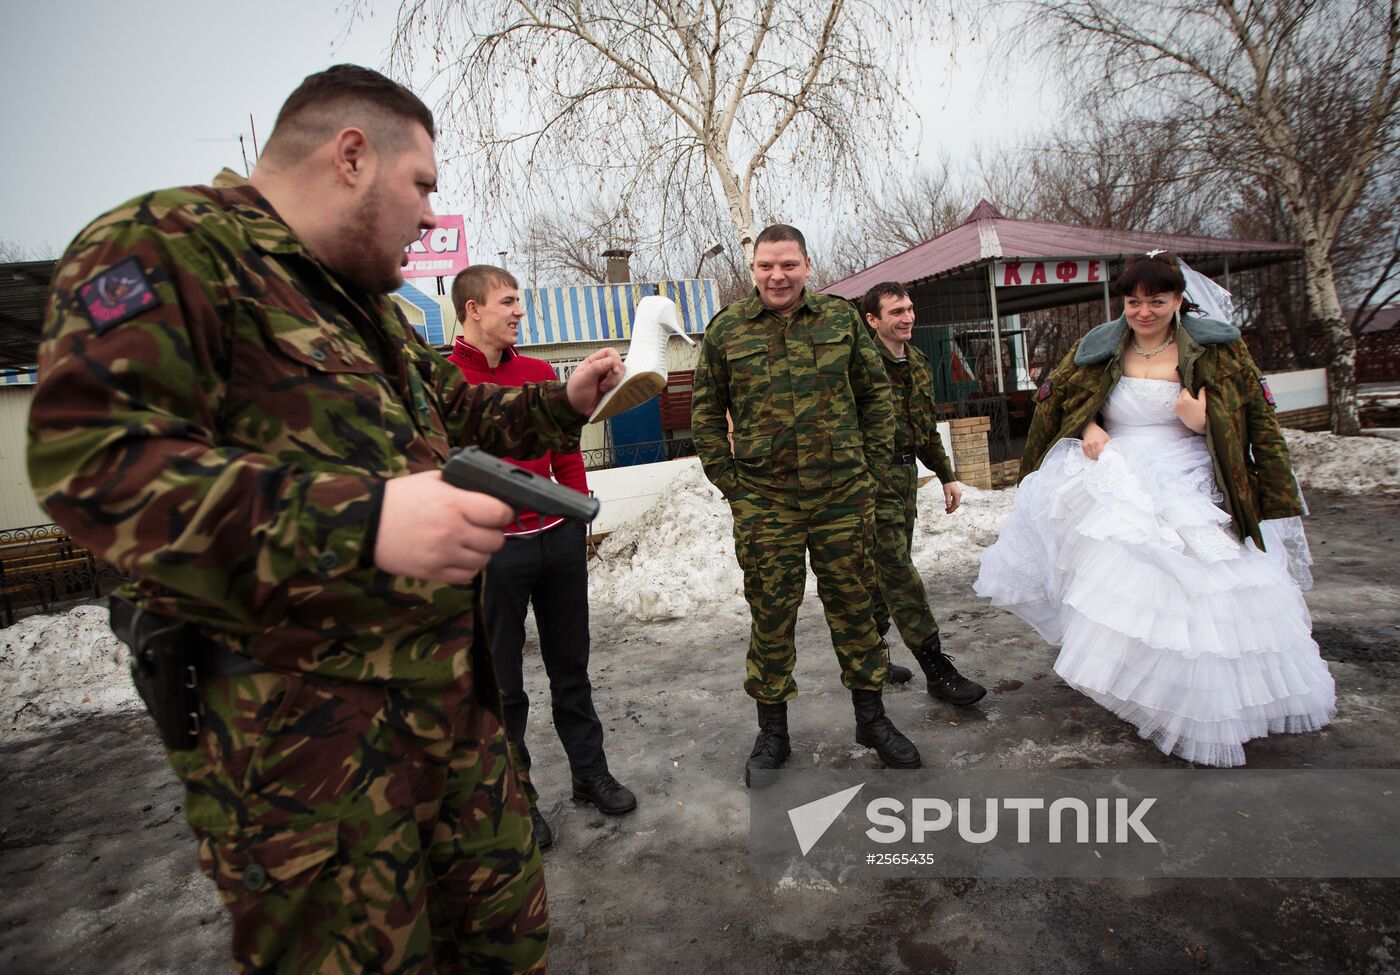 Wedding of self-defense fighter from Vikings unit